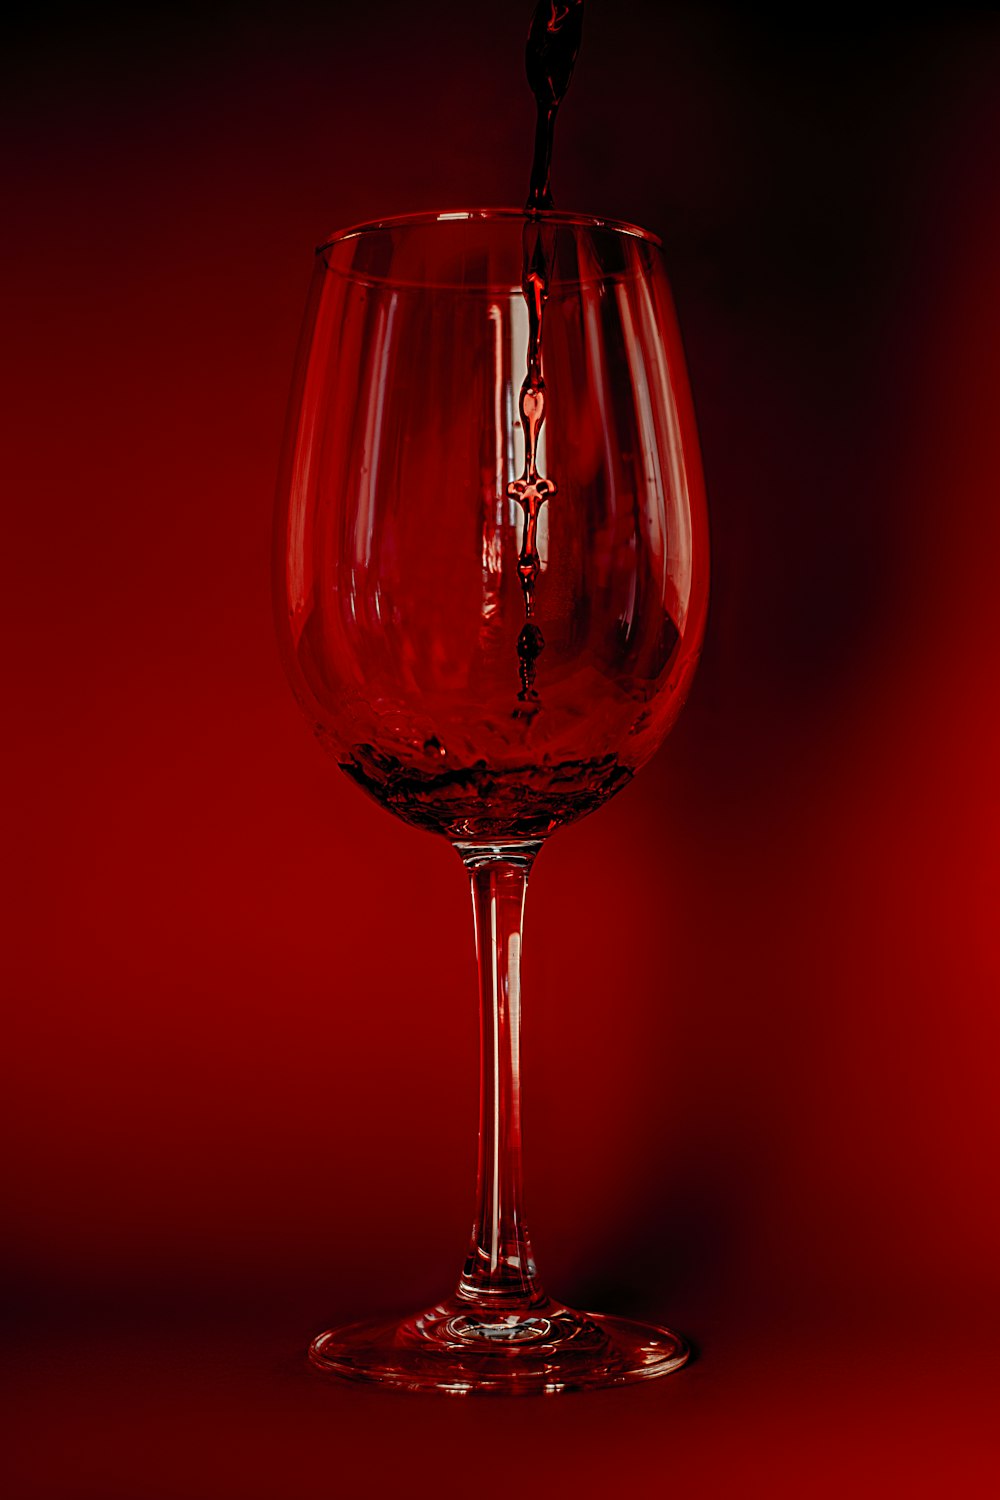 Red wine in clear wine glass photo – Free Brasil Image on Unsplash